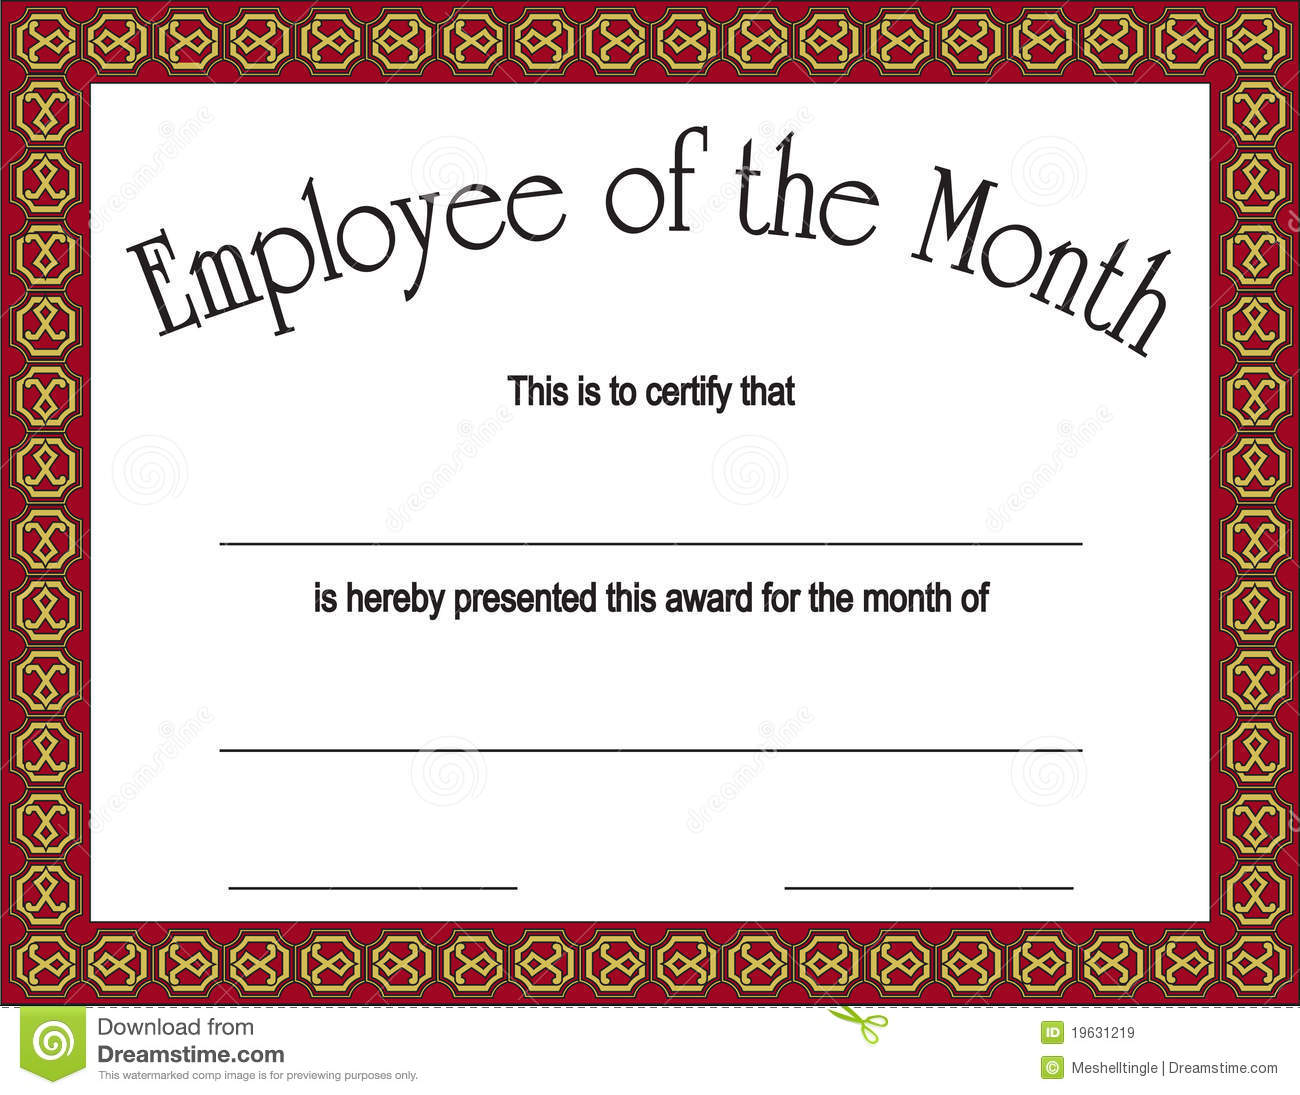 Employee Of The Month Award With Royalty Free Stock Images   Image    